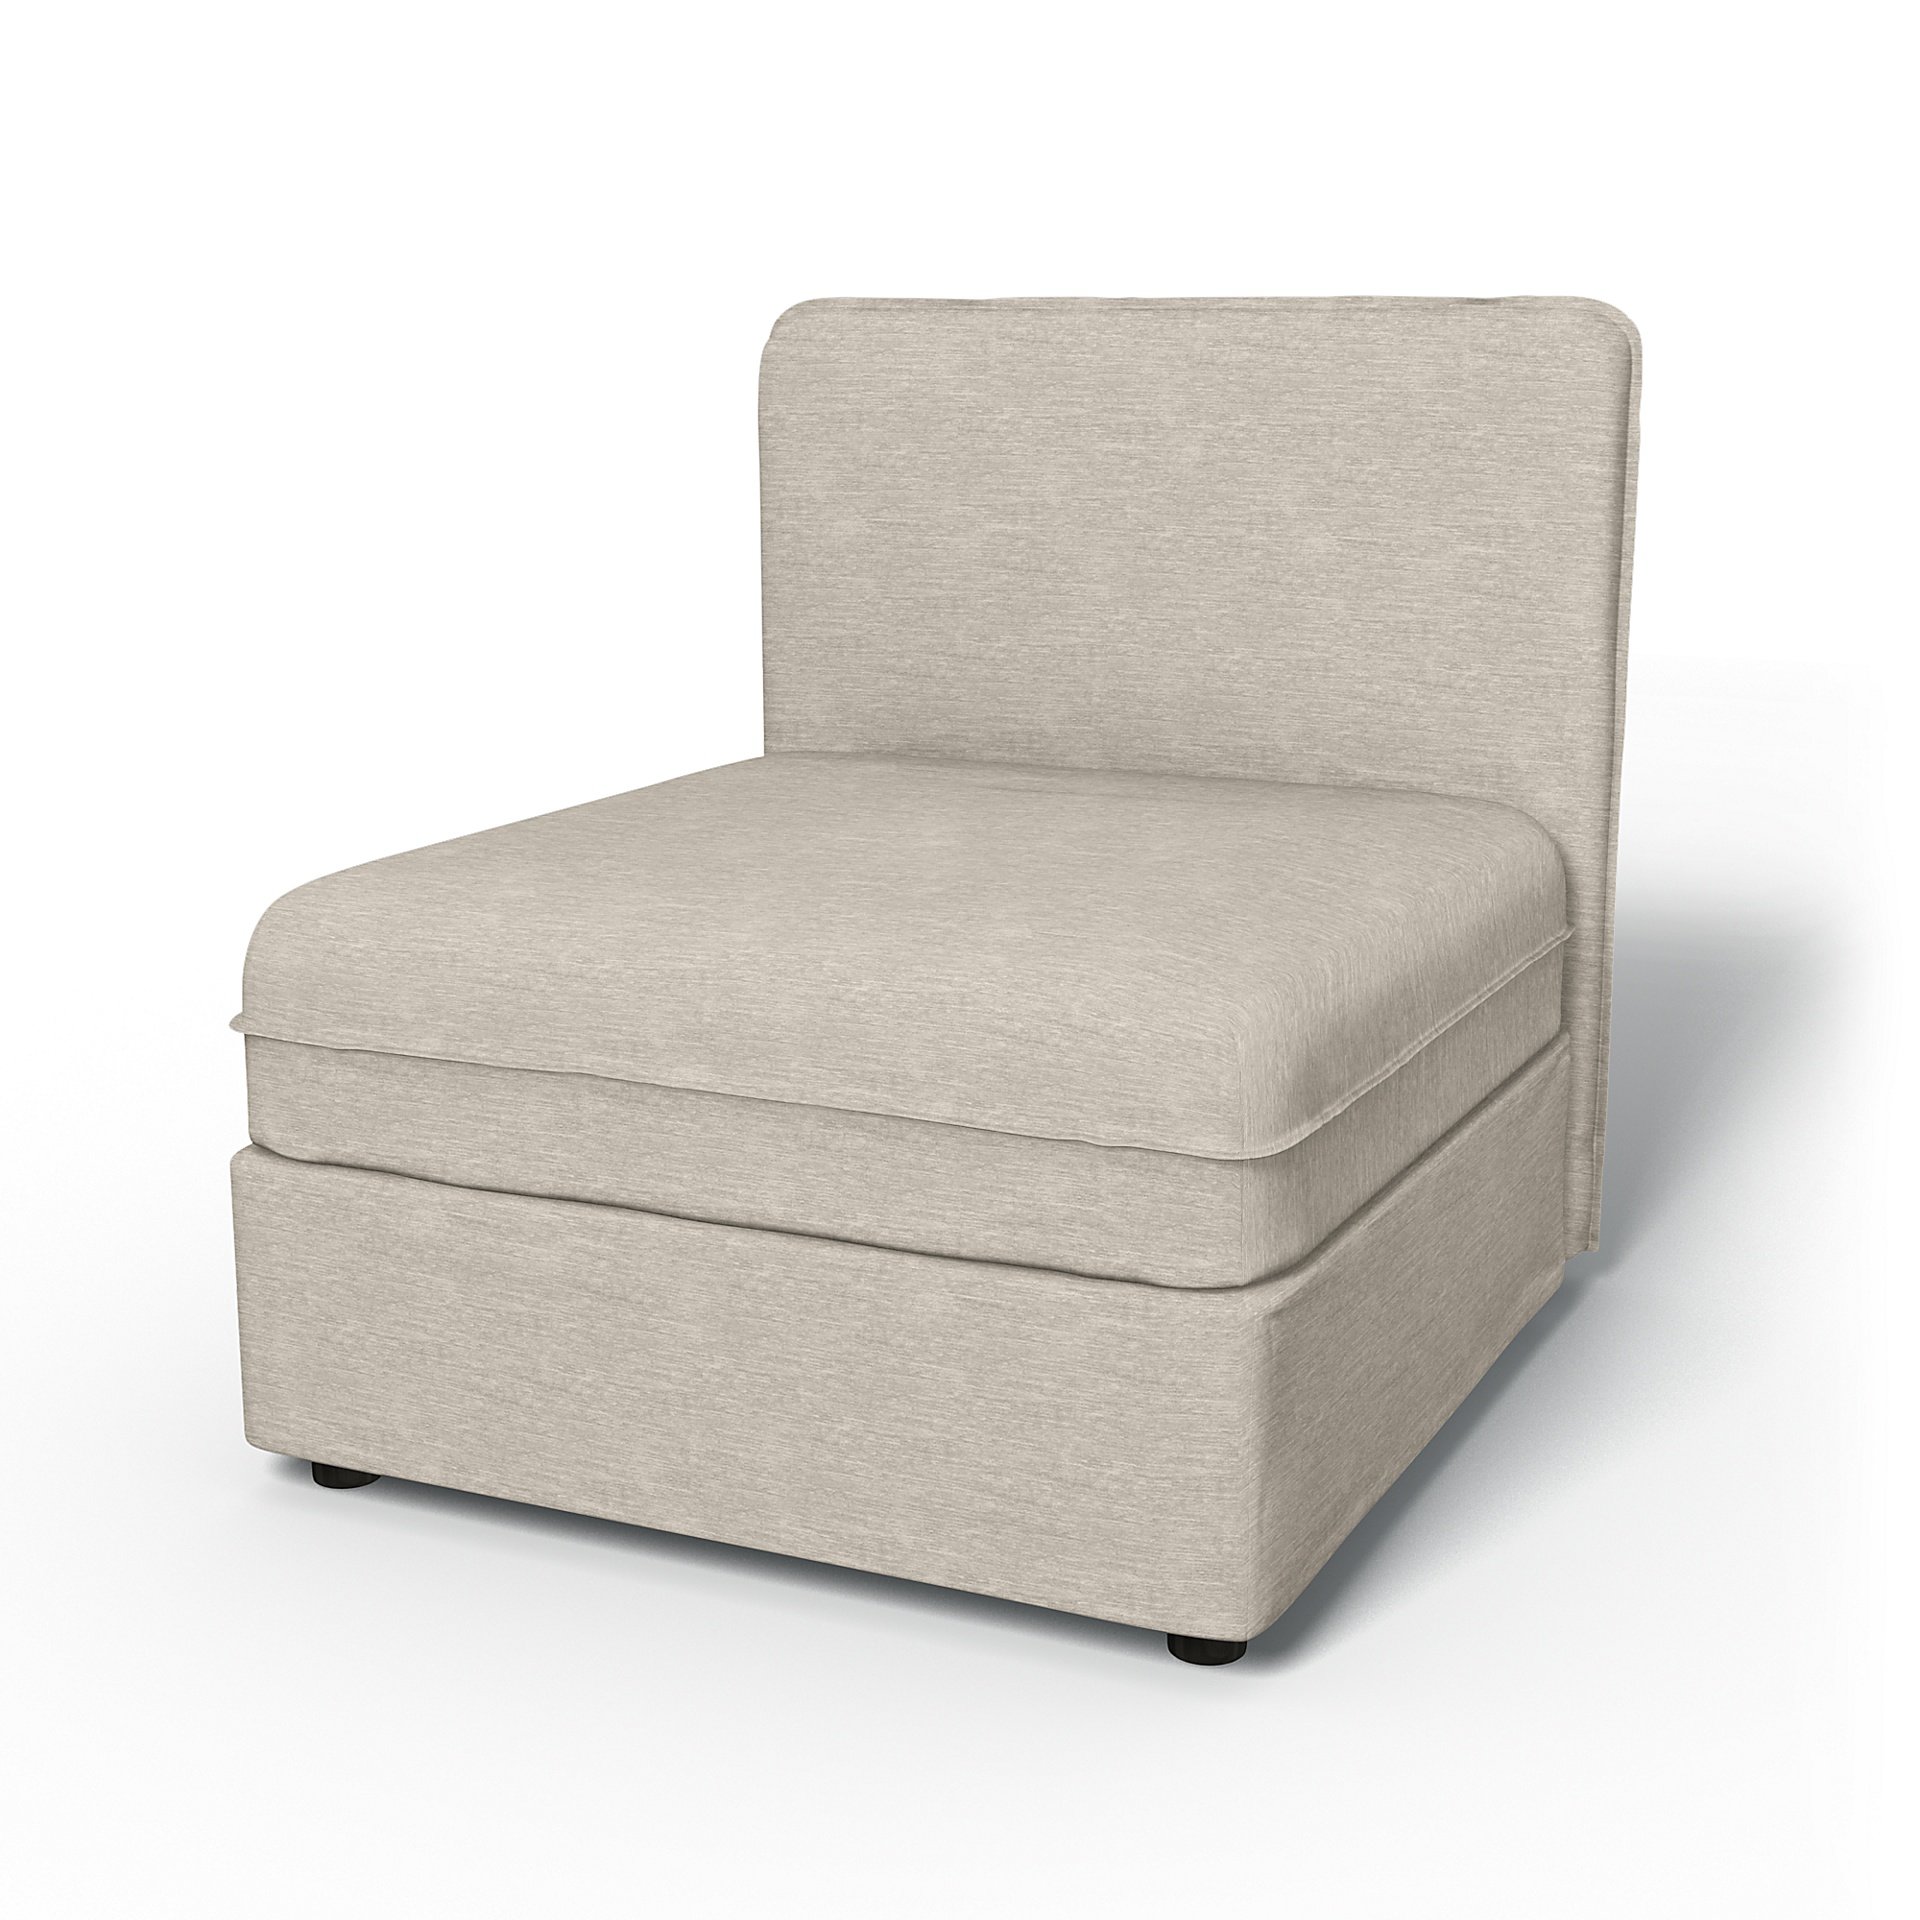 IKEA - Vallentuna Seat Module with Low Back Cover 80x80cm 32x32in, Natural White, Velvet - Bemz